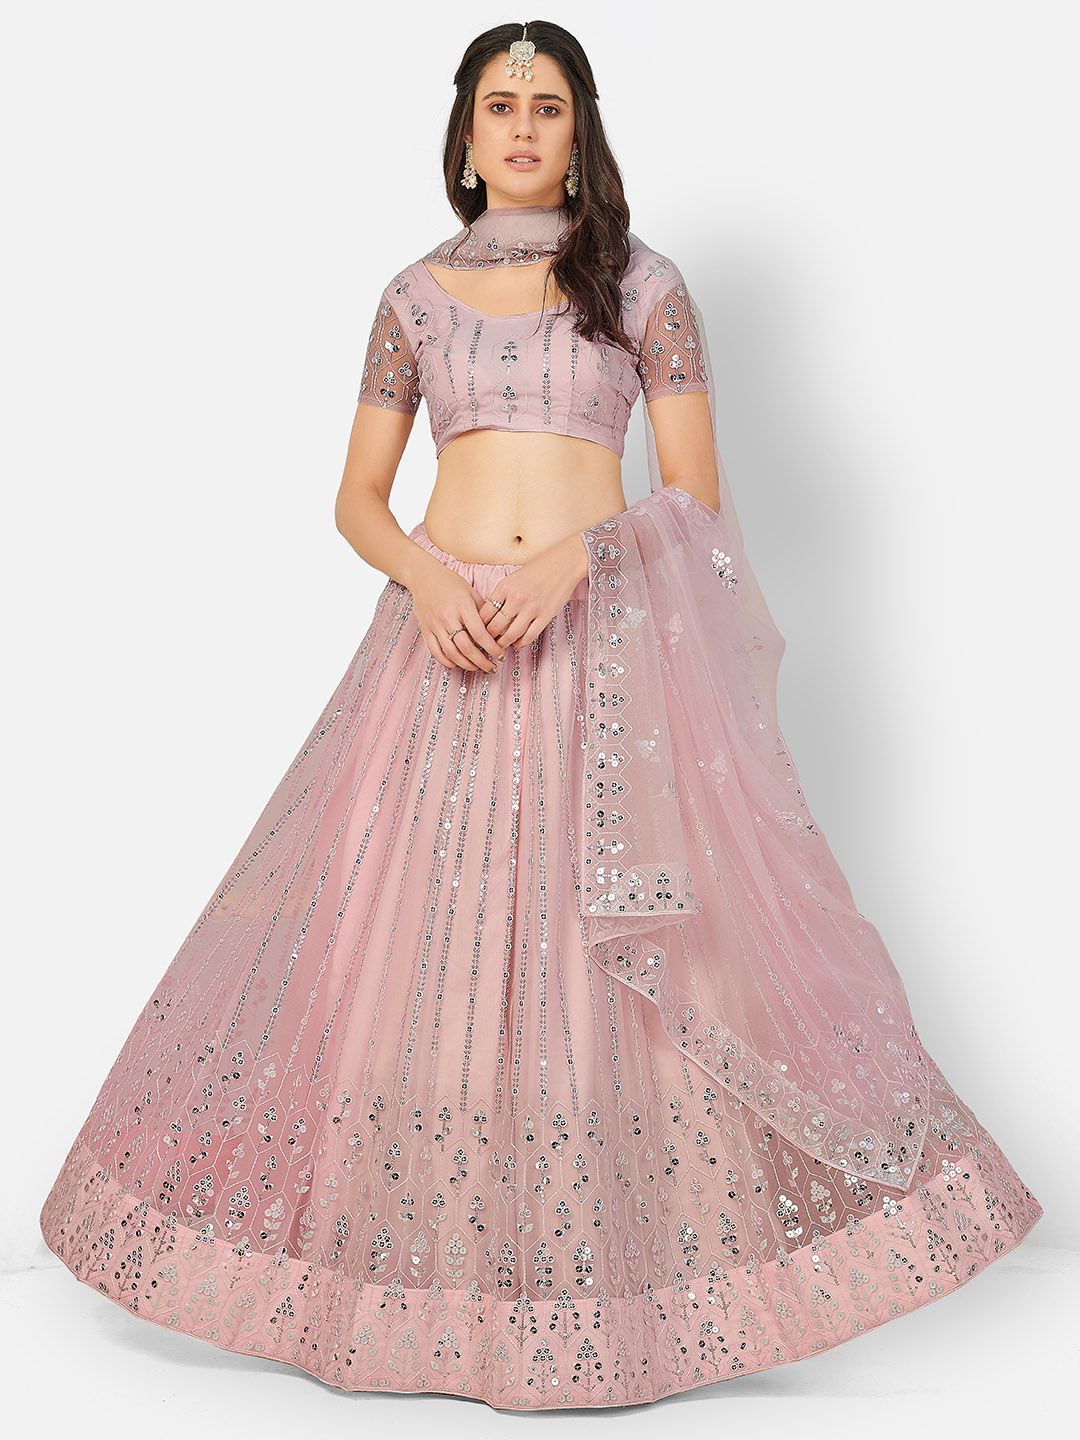 SHOPGARB Peach & Silver-Toned Semi-Stitched Lehenga & Unstitched Blouse With Net Dupatta Price in India